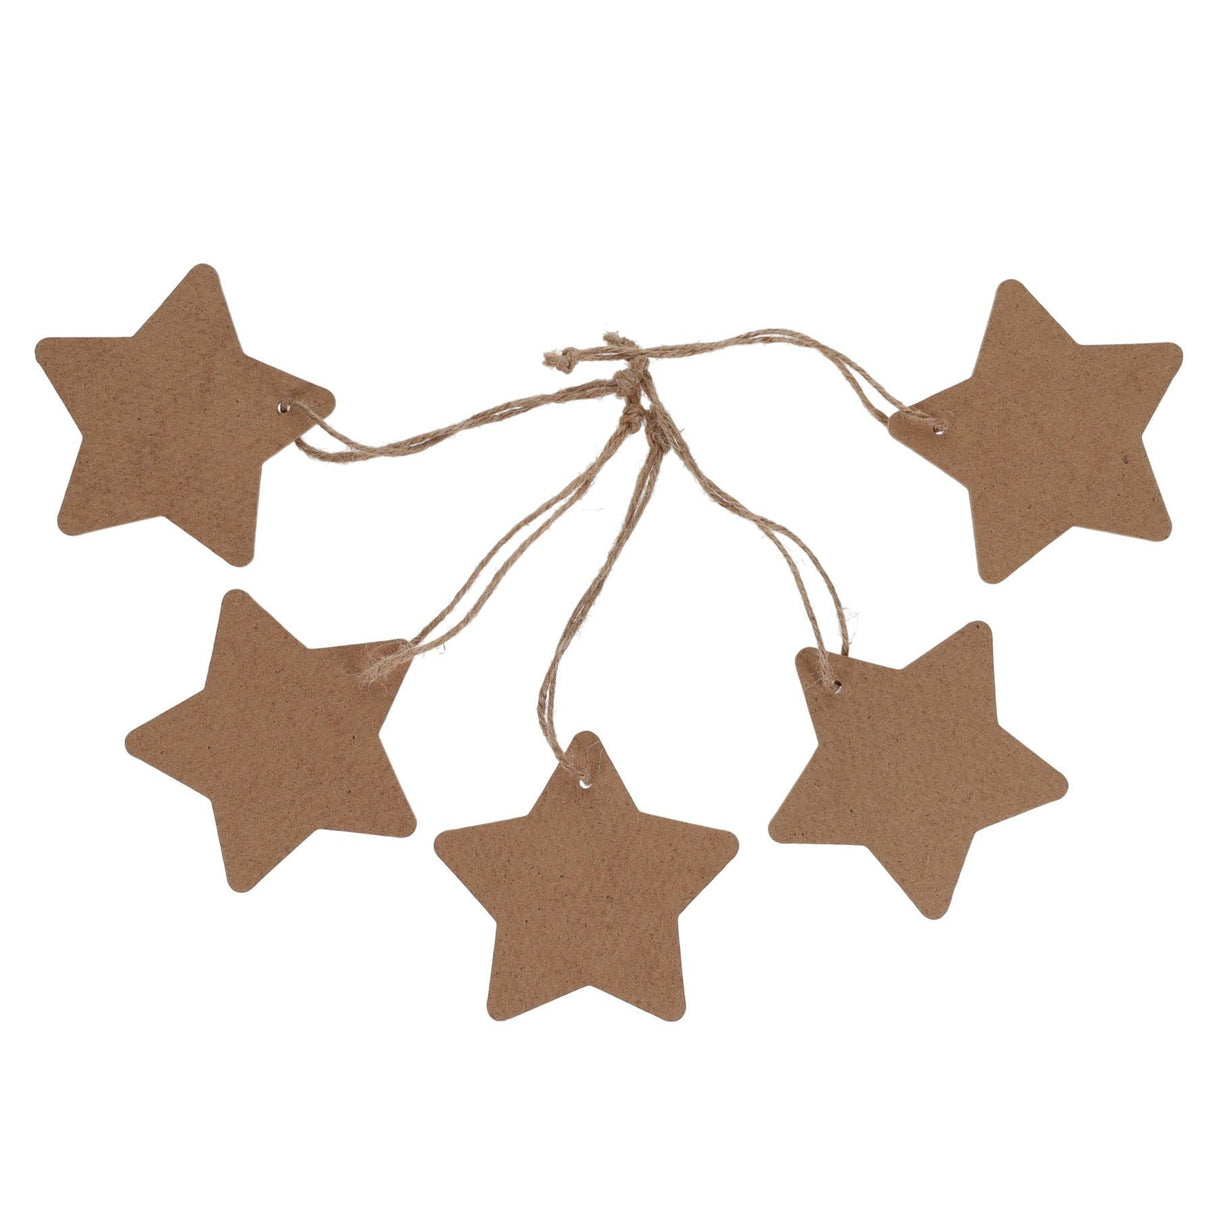 Icon Wooden Festive Decor - Star - Pack of 5-Crafting Materials-Icon|StationeryShop.co.uk